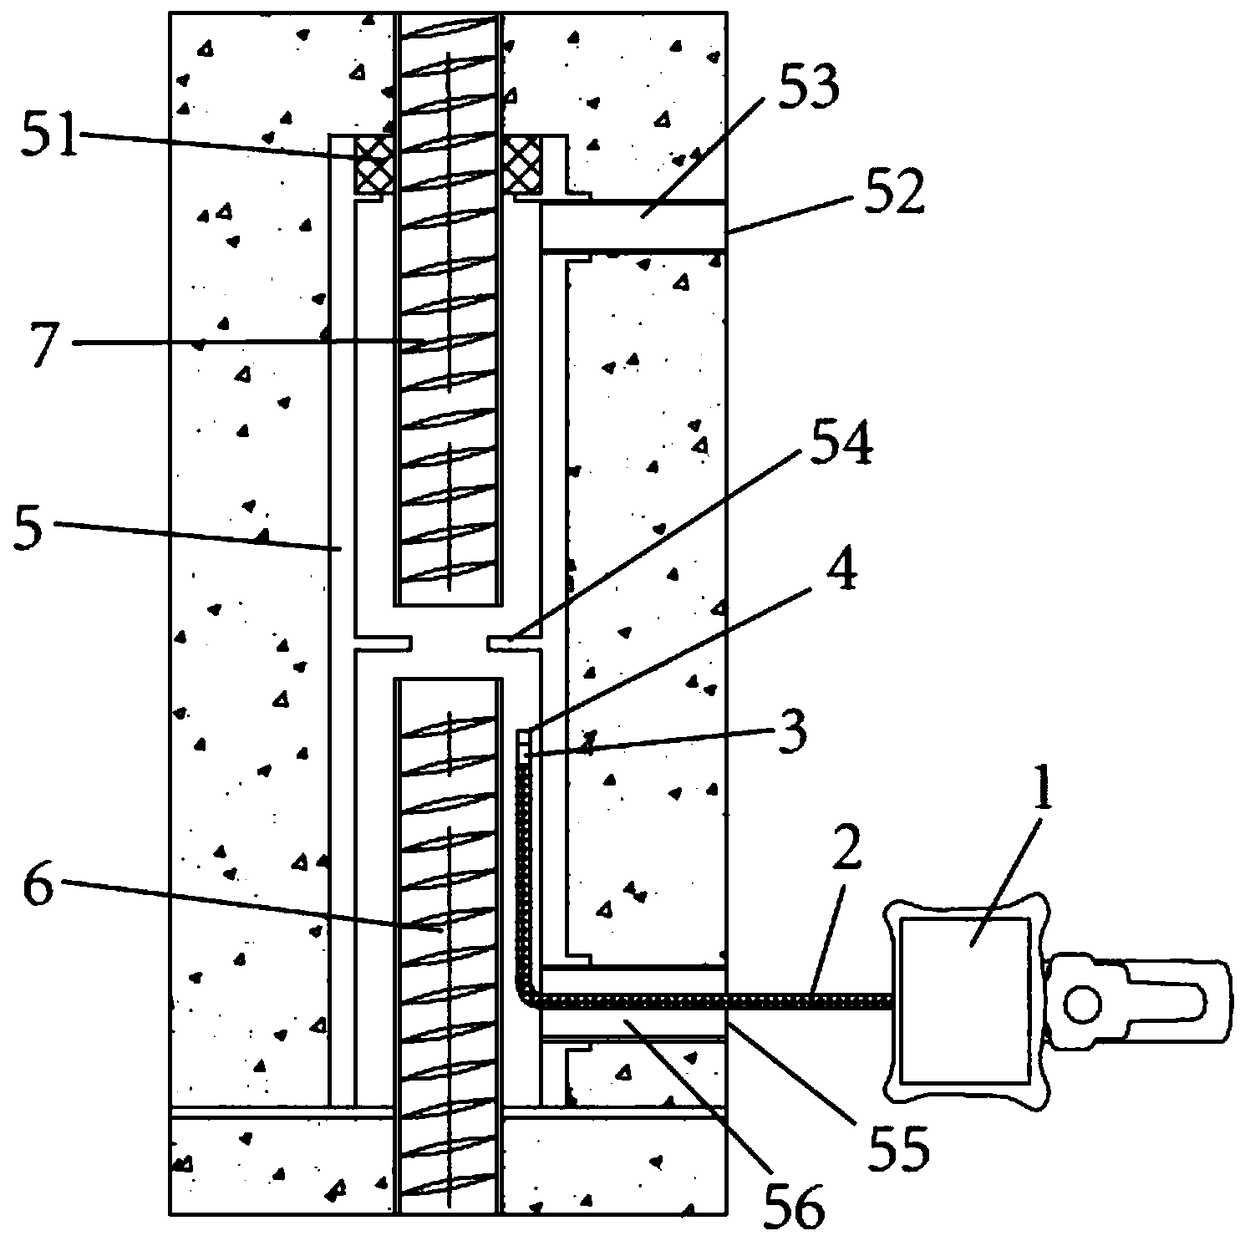 A method for detecting the insertion depth of connecting steel bars in fully grouted sleeve steel bar joints